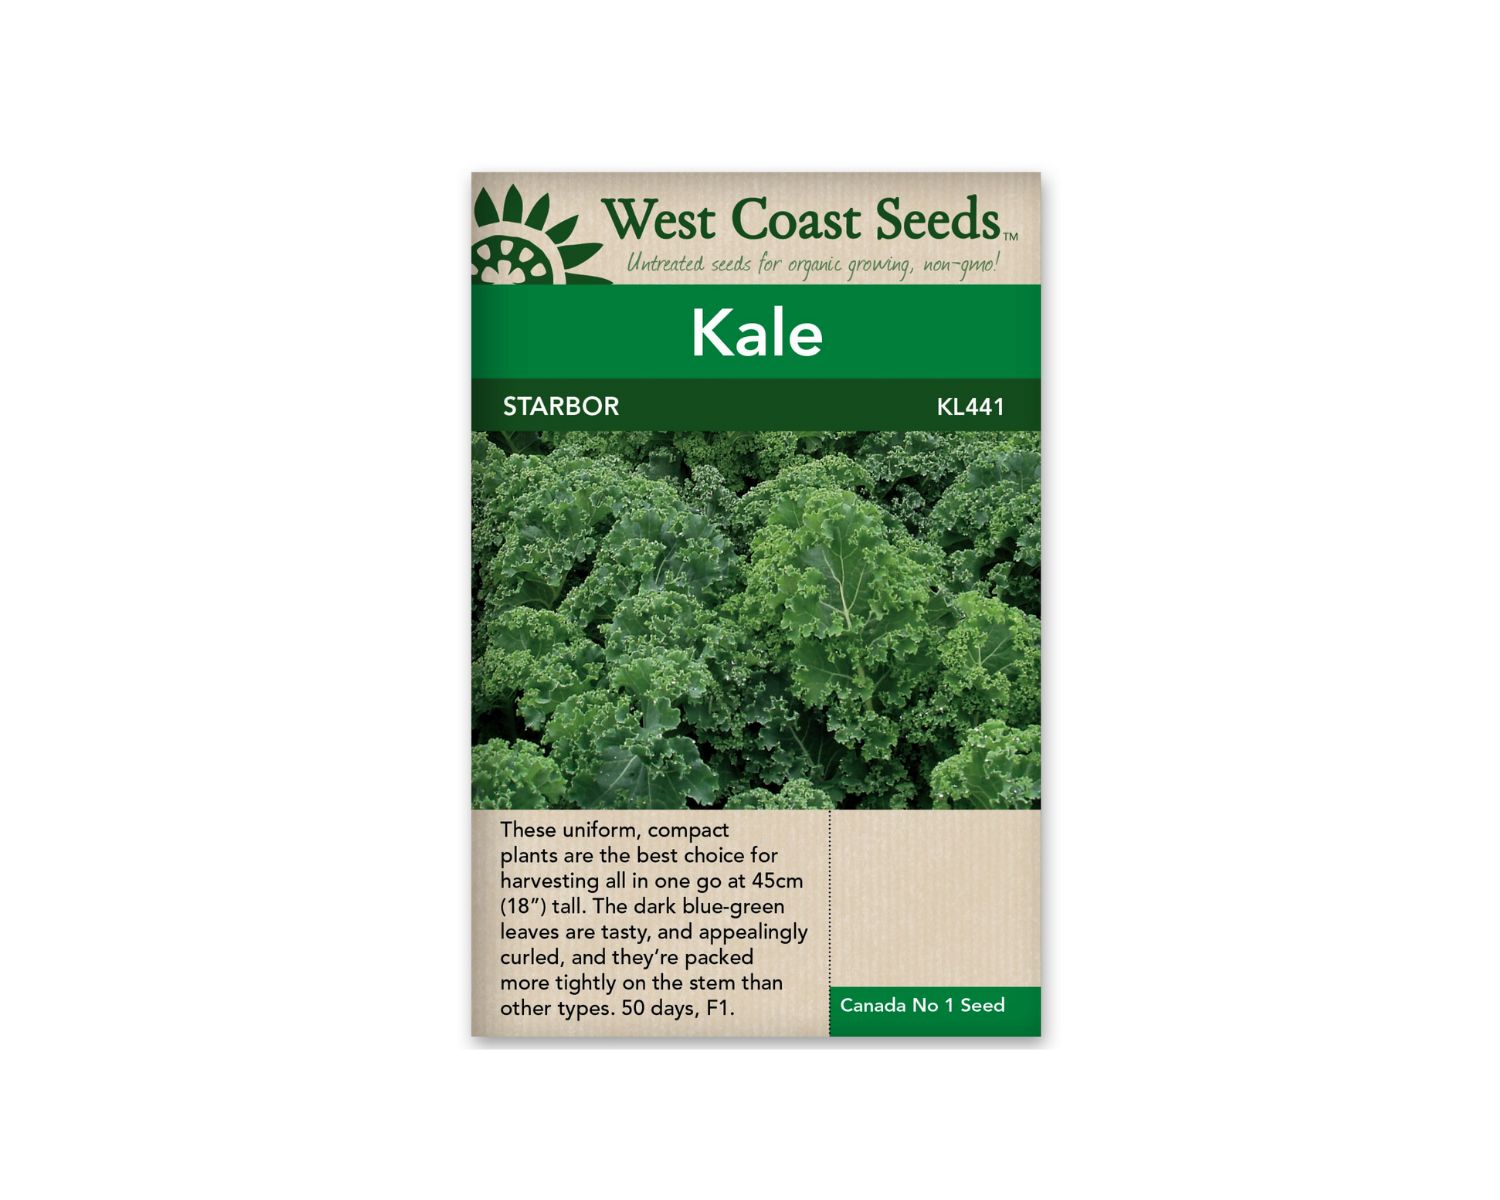 Where Do Kale Seeds Come From